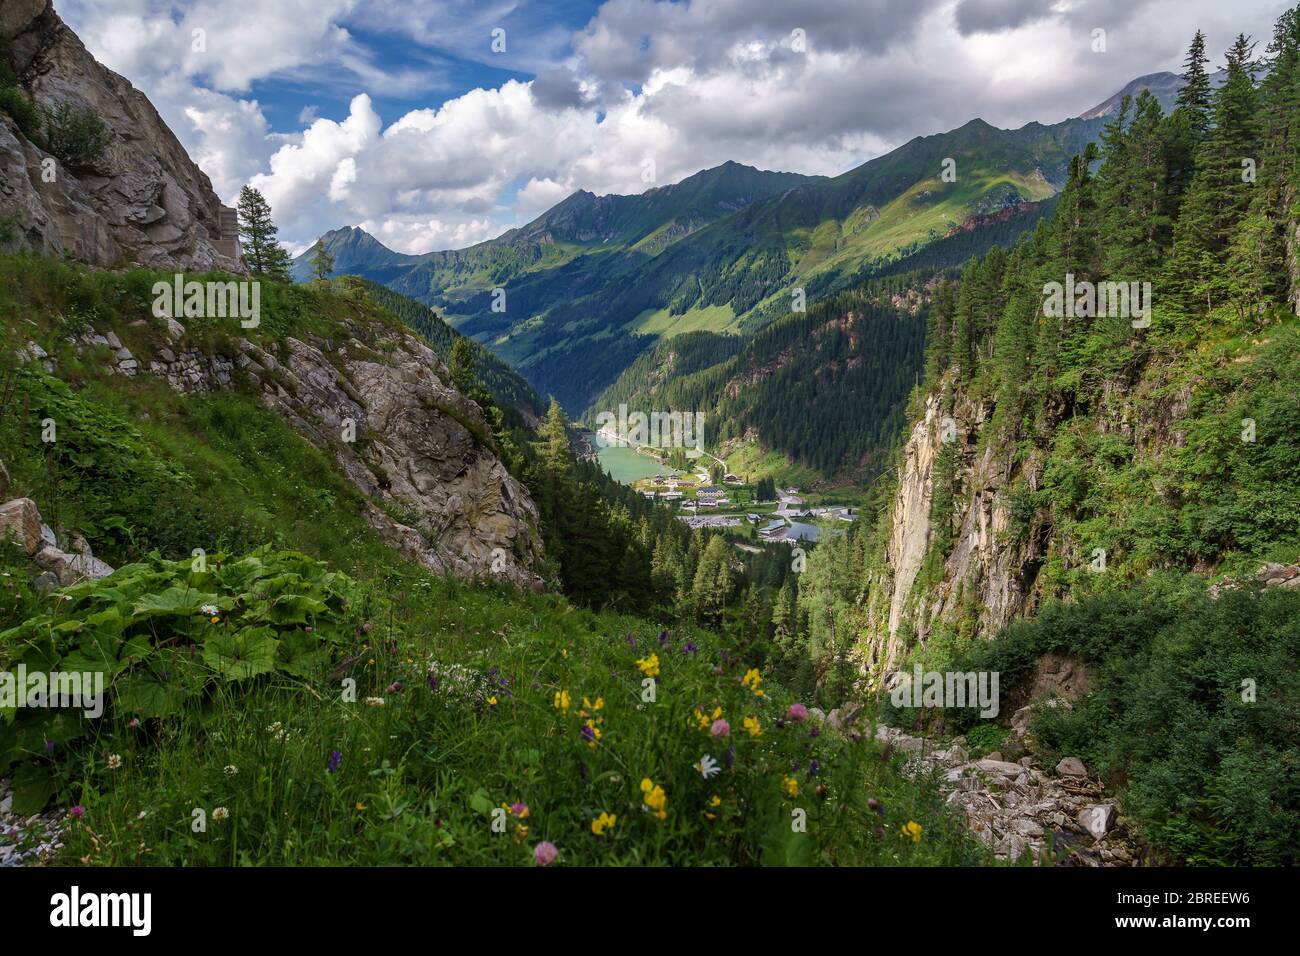 View of the Hochplateau Enzingerboden in the Stubachtall in the Pinzgau region, Austria Stock Photo